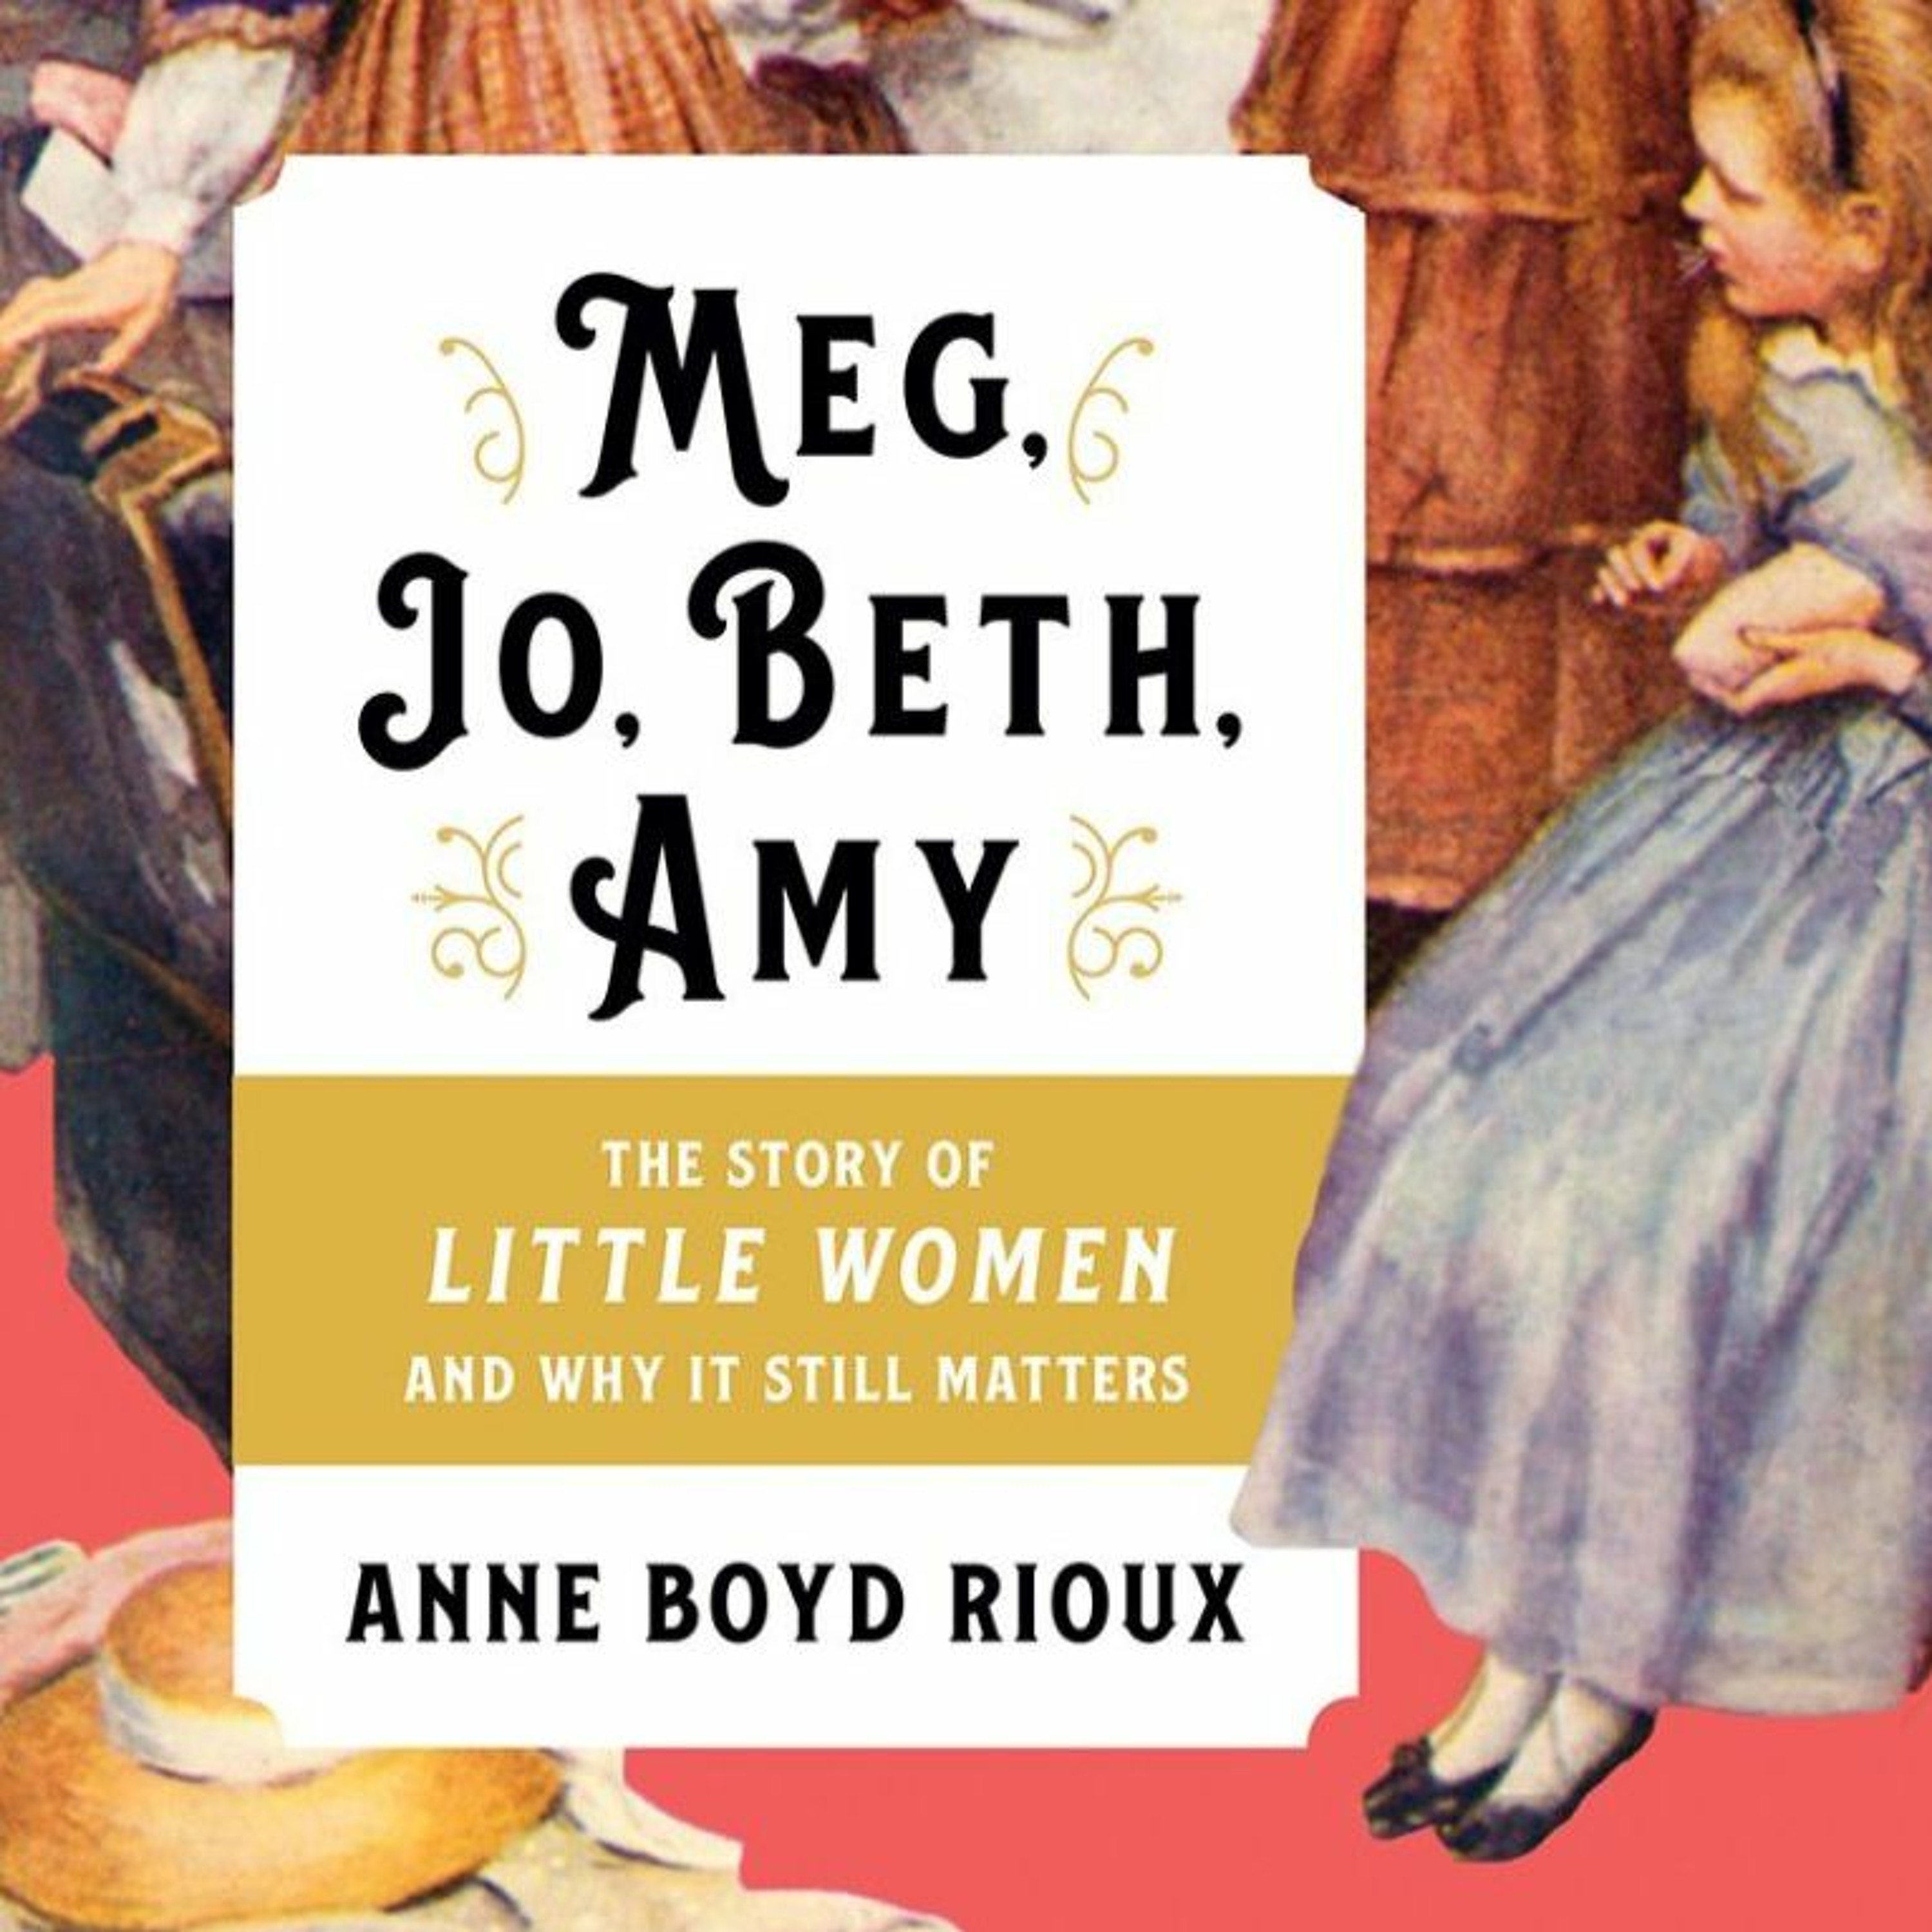 Anne Boyd Rioux, “Meg, Jo, Beth, Amy: The Story of Little Women and Why It Still Matters”